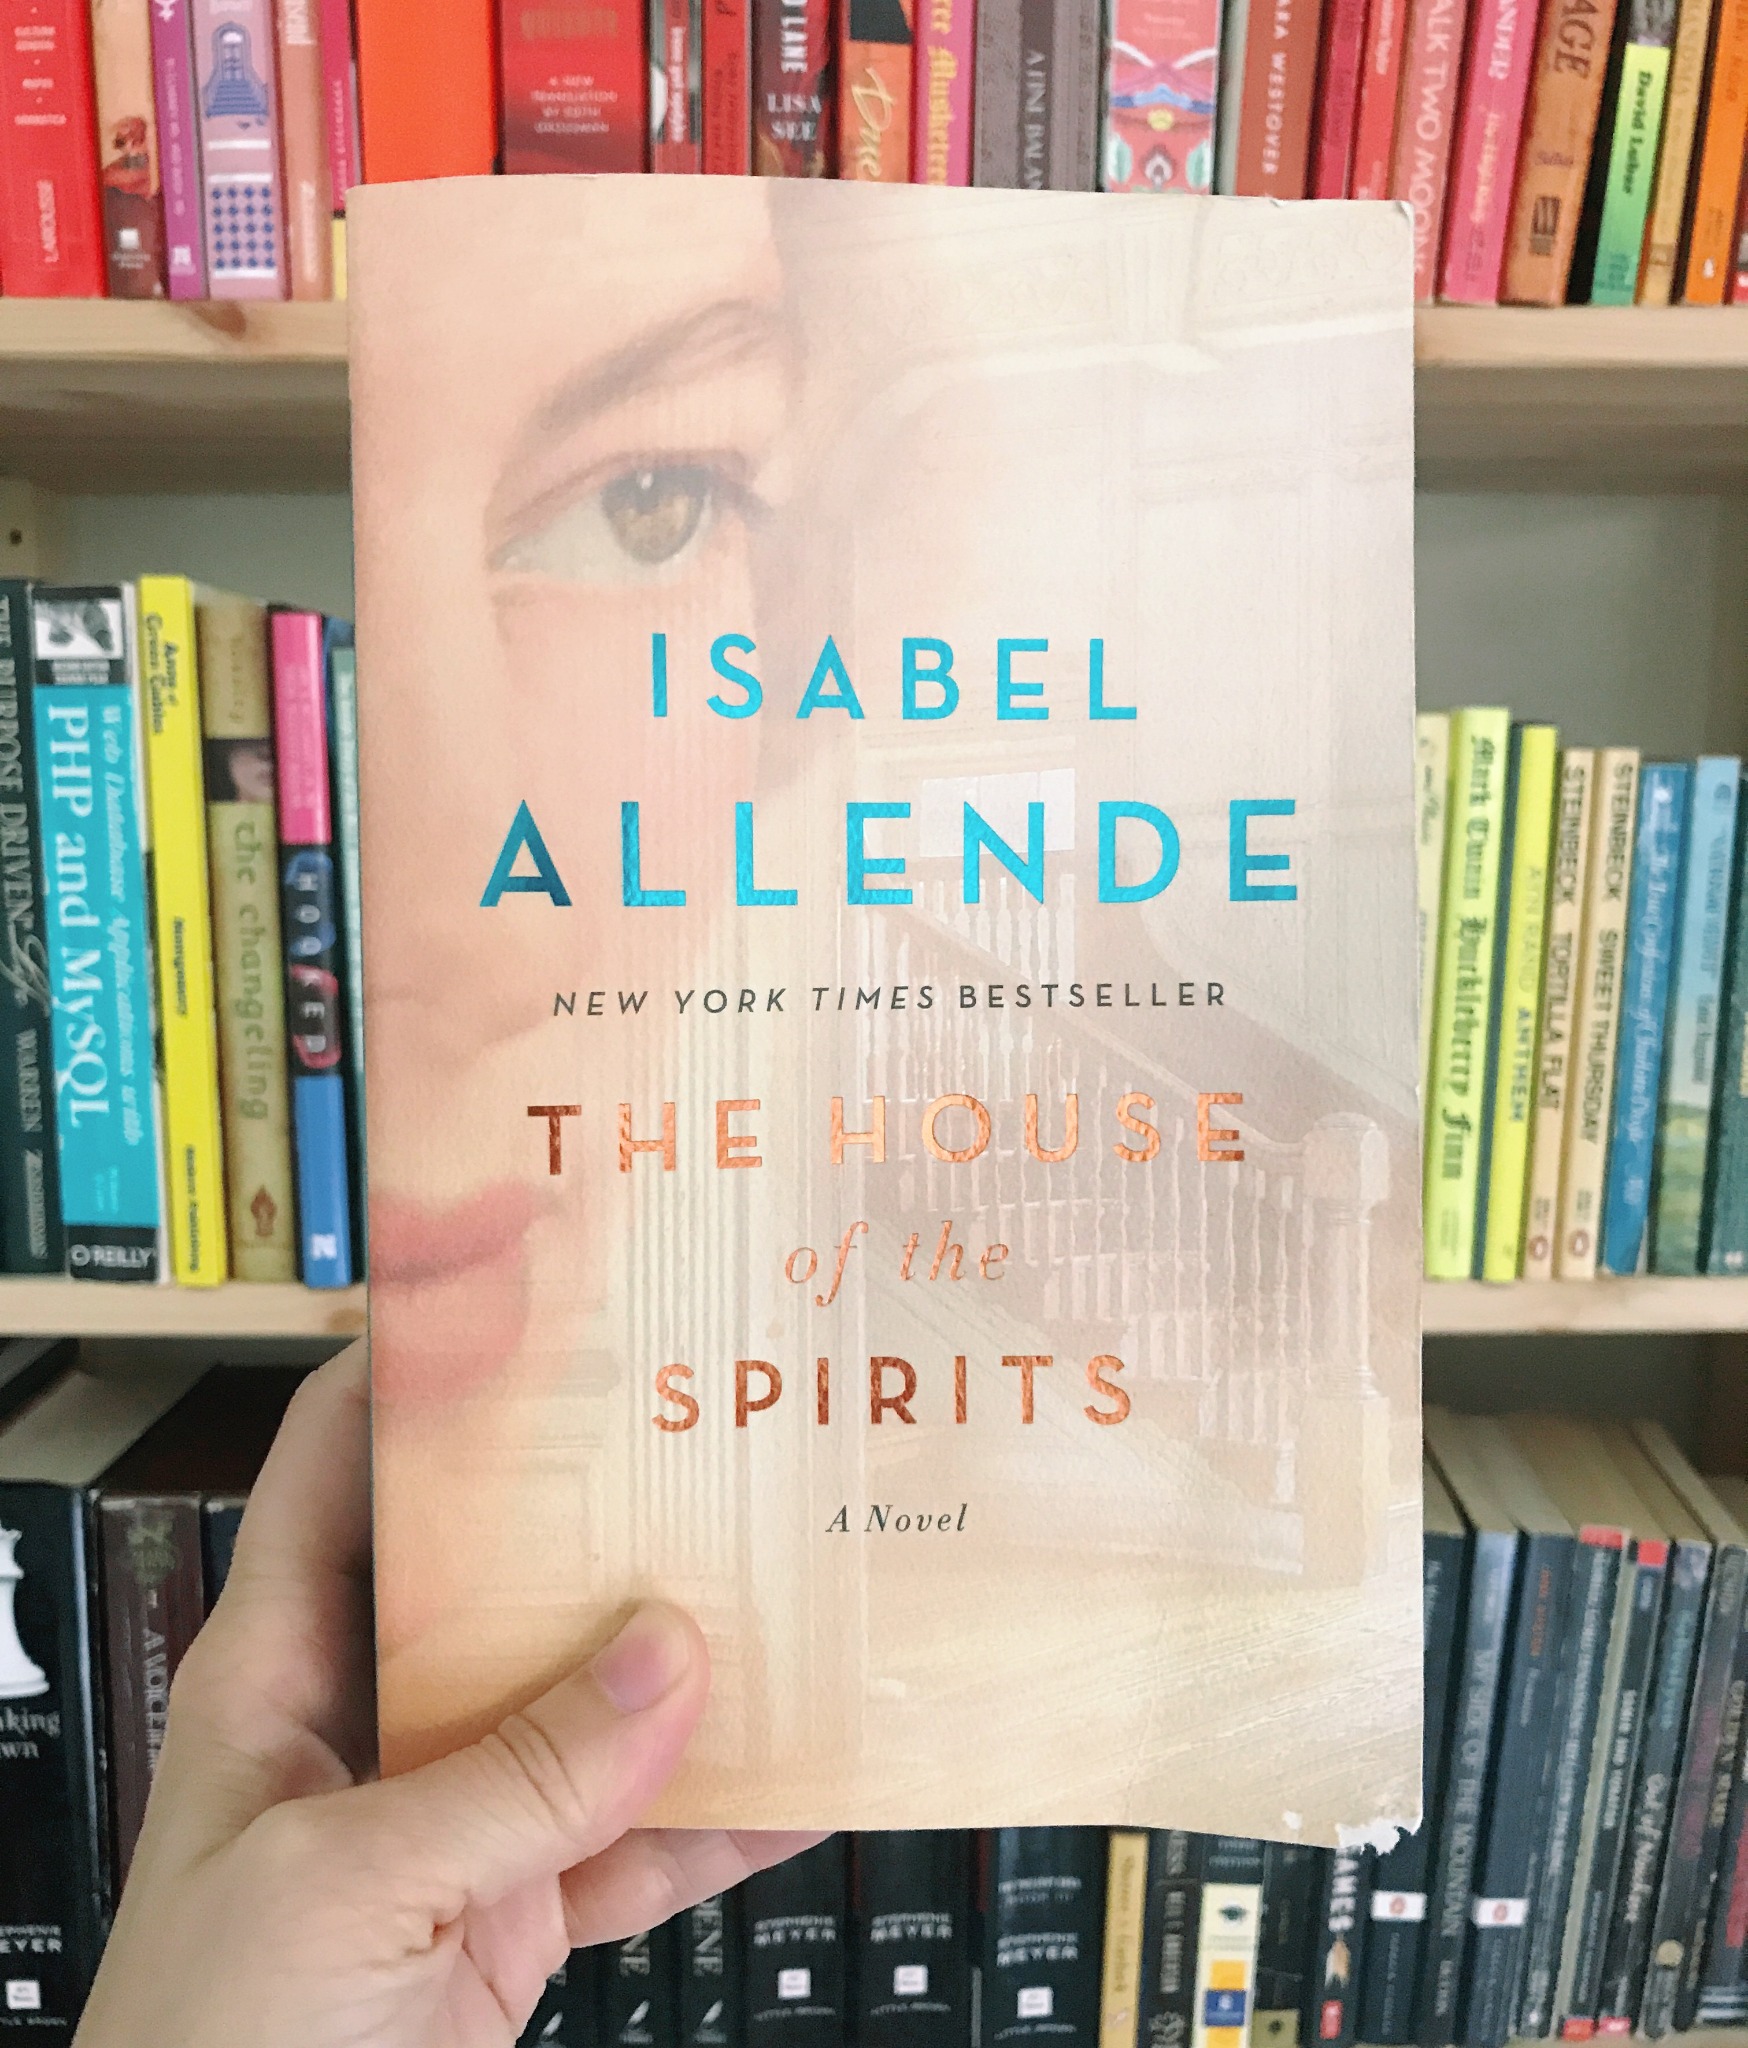 The house of the spirits allende book review